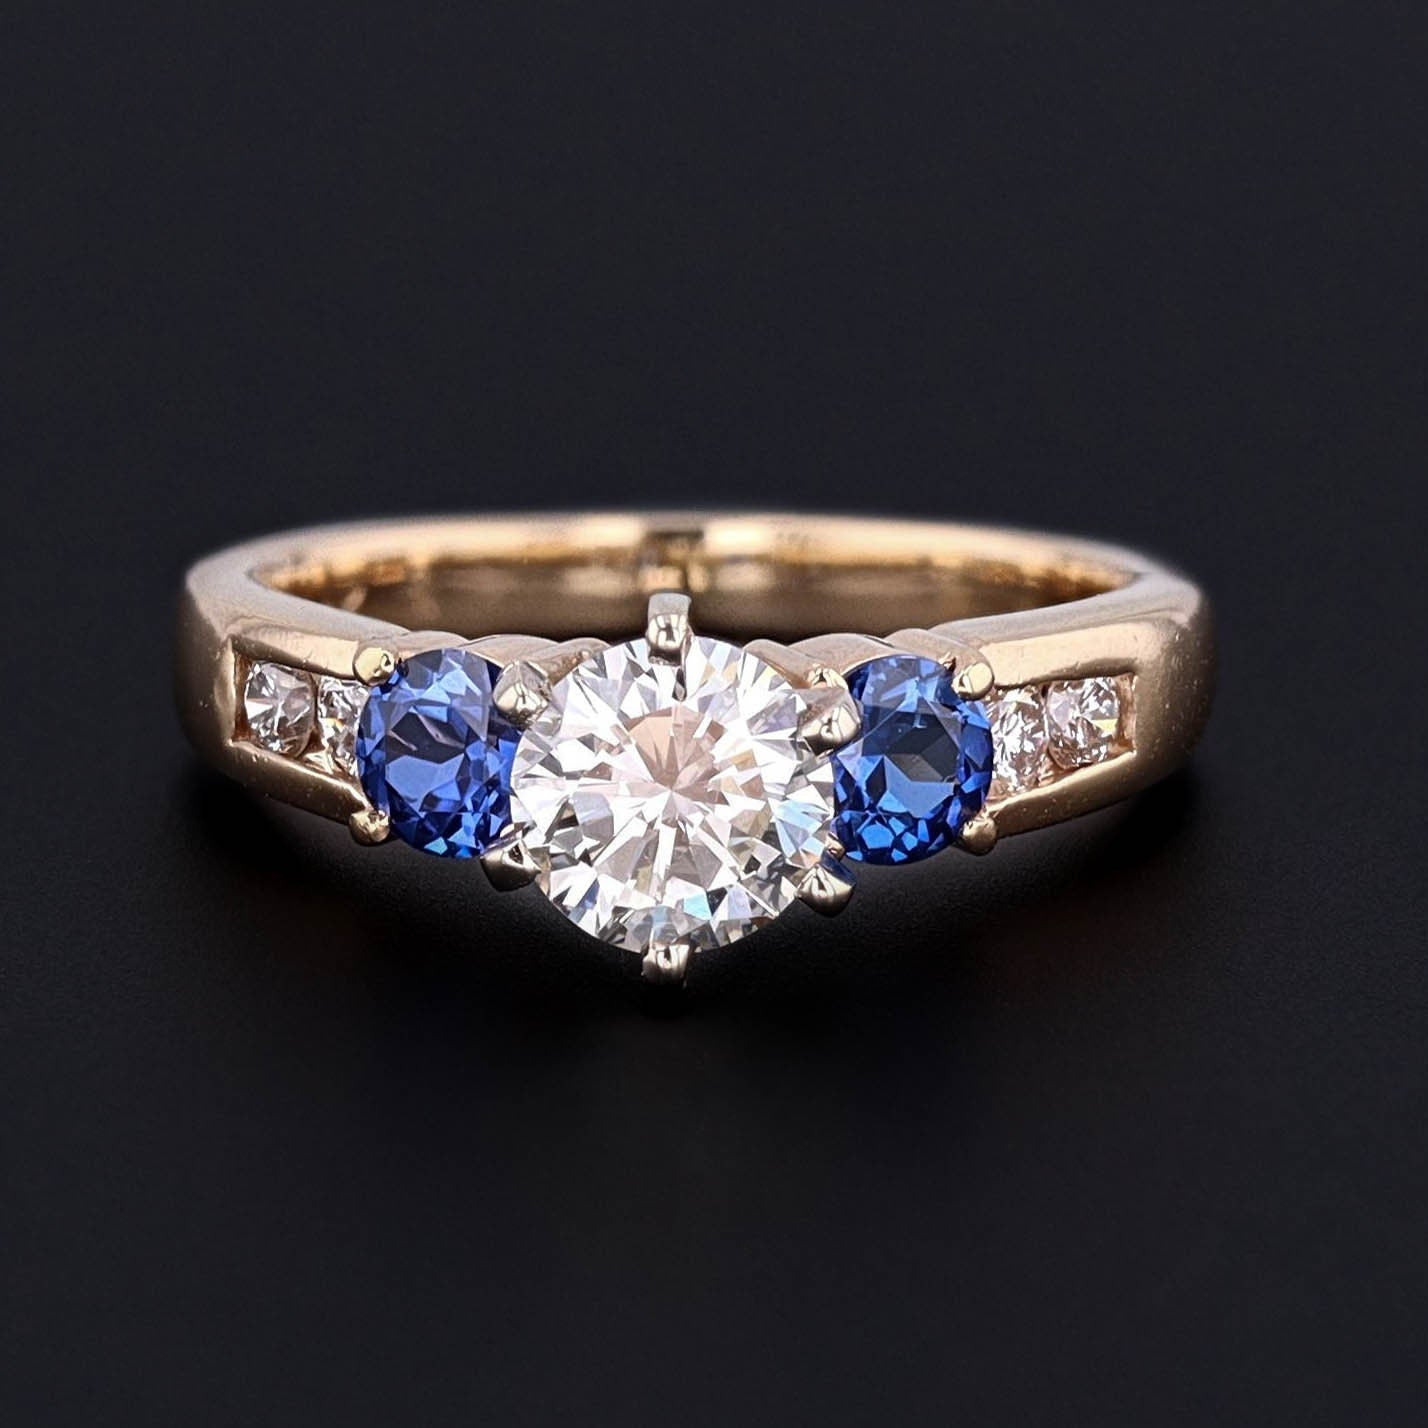 Vintage Certified Diamond and Sapphire Engagement Ring of 14k Gold